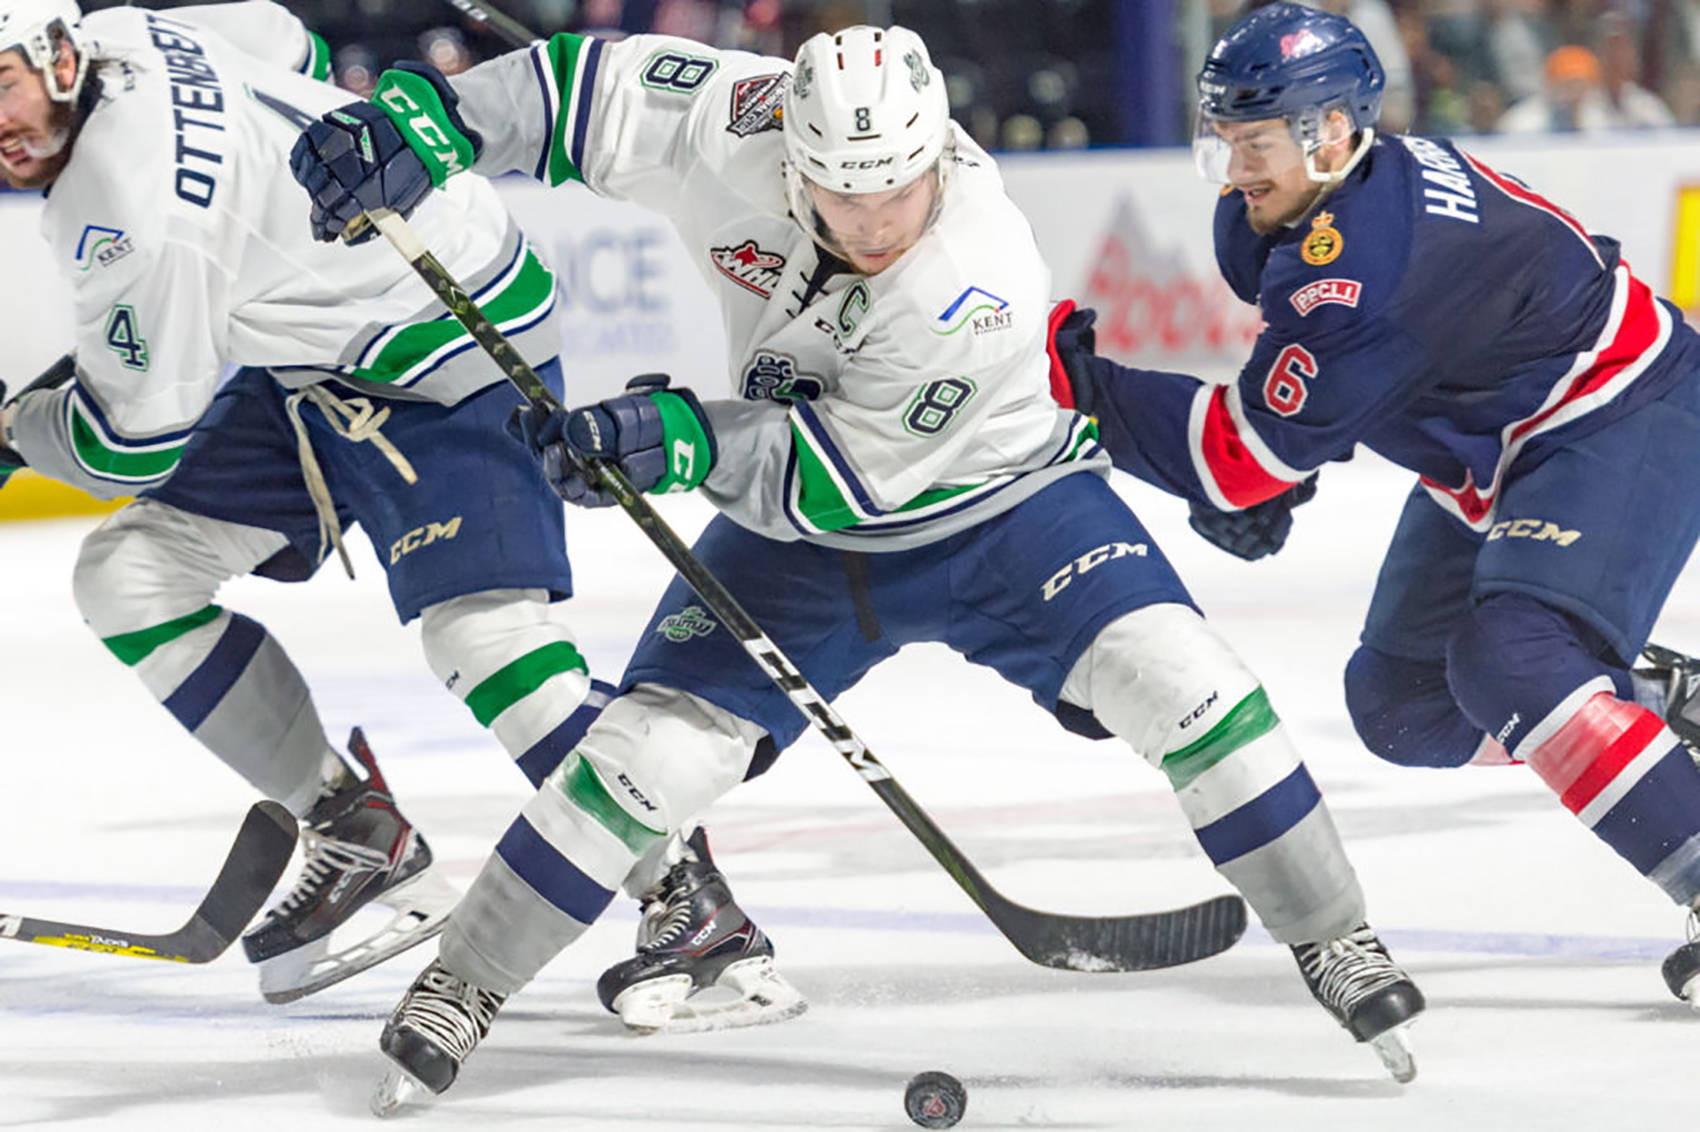 The Thunderbirds’ Scott Eansor tries to control the puck against the Pats during Game 4 WHL championship series action Wednesday night at the ShoWare Center. COURTESY PHOTO, Brian Liesse/T-Birds